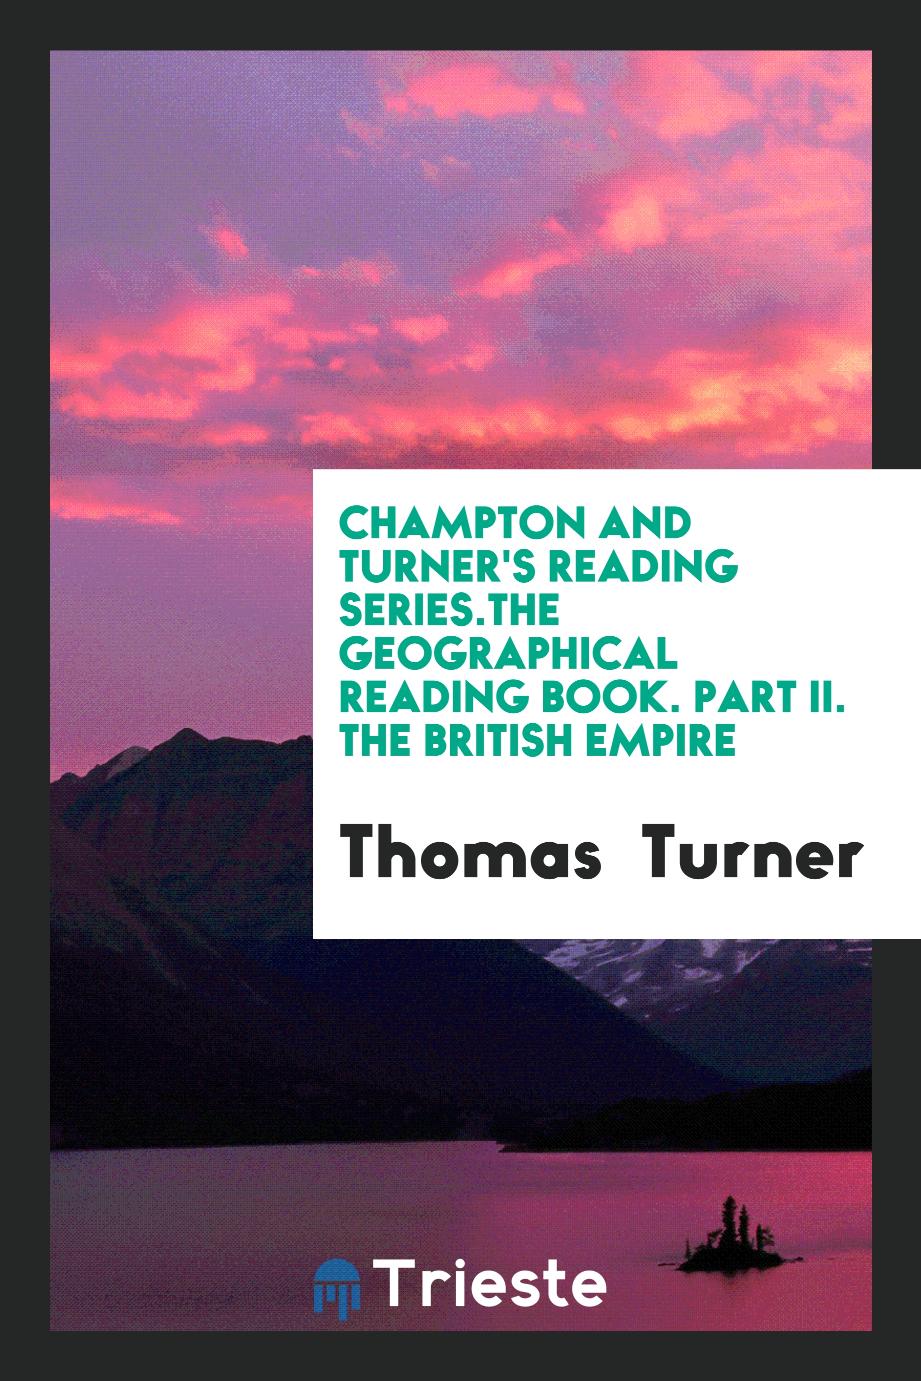 Champton and Turner's Reading Series.The Geographical Reading Book. Part II. The British Empire